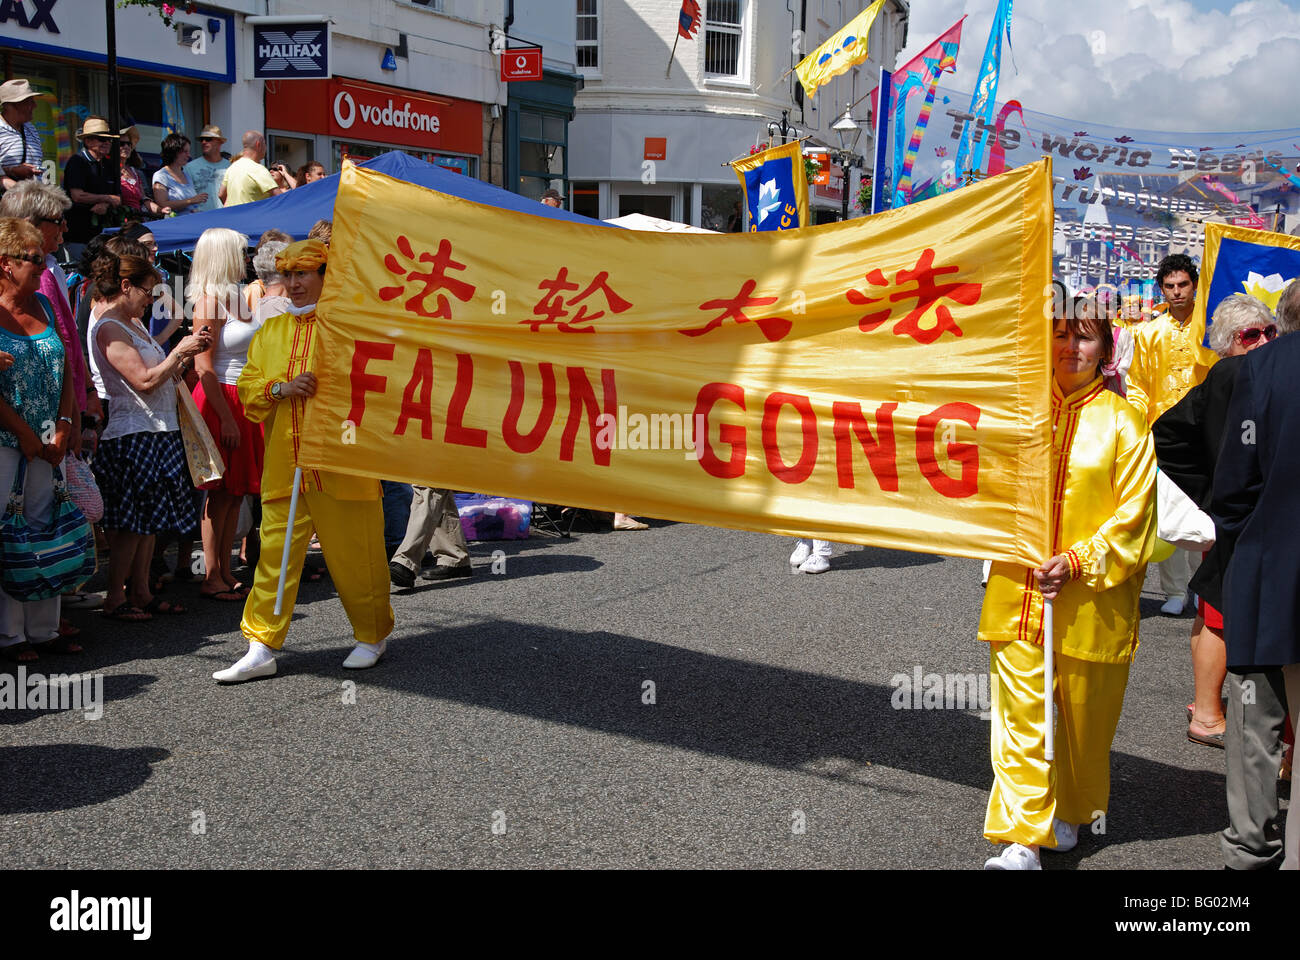 members of the chinese cult 'falun gong ' marching through the streets of penzance in cornwall, uk Stock Photo